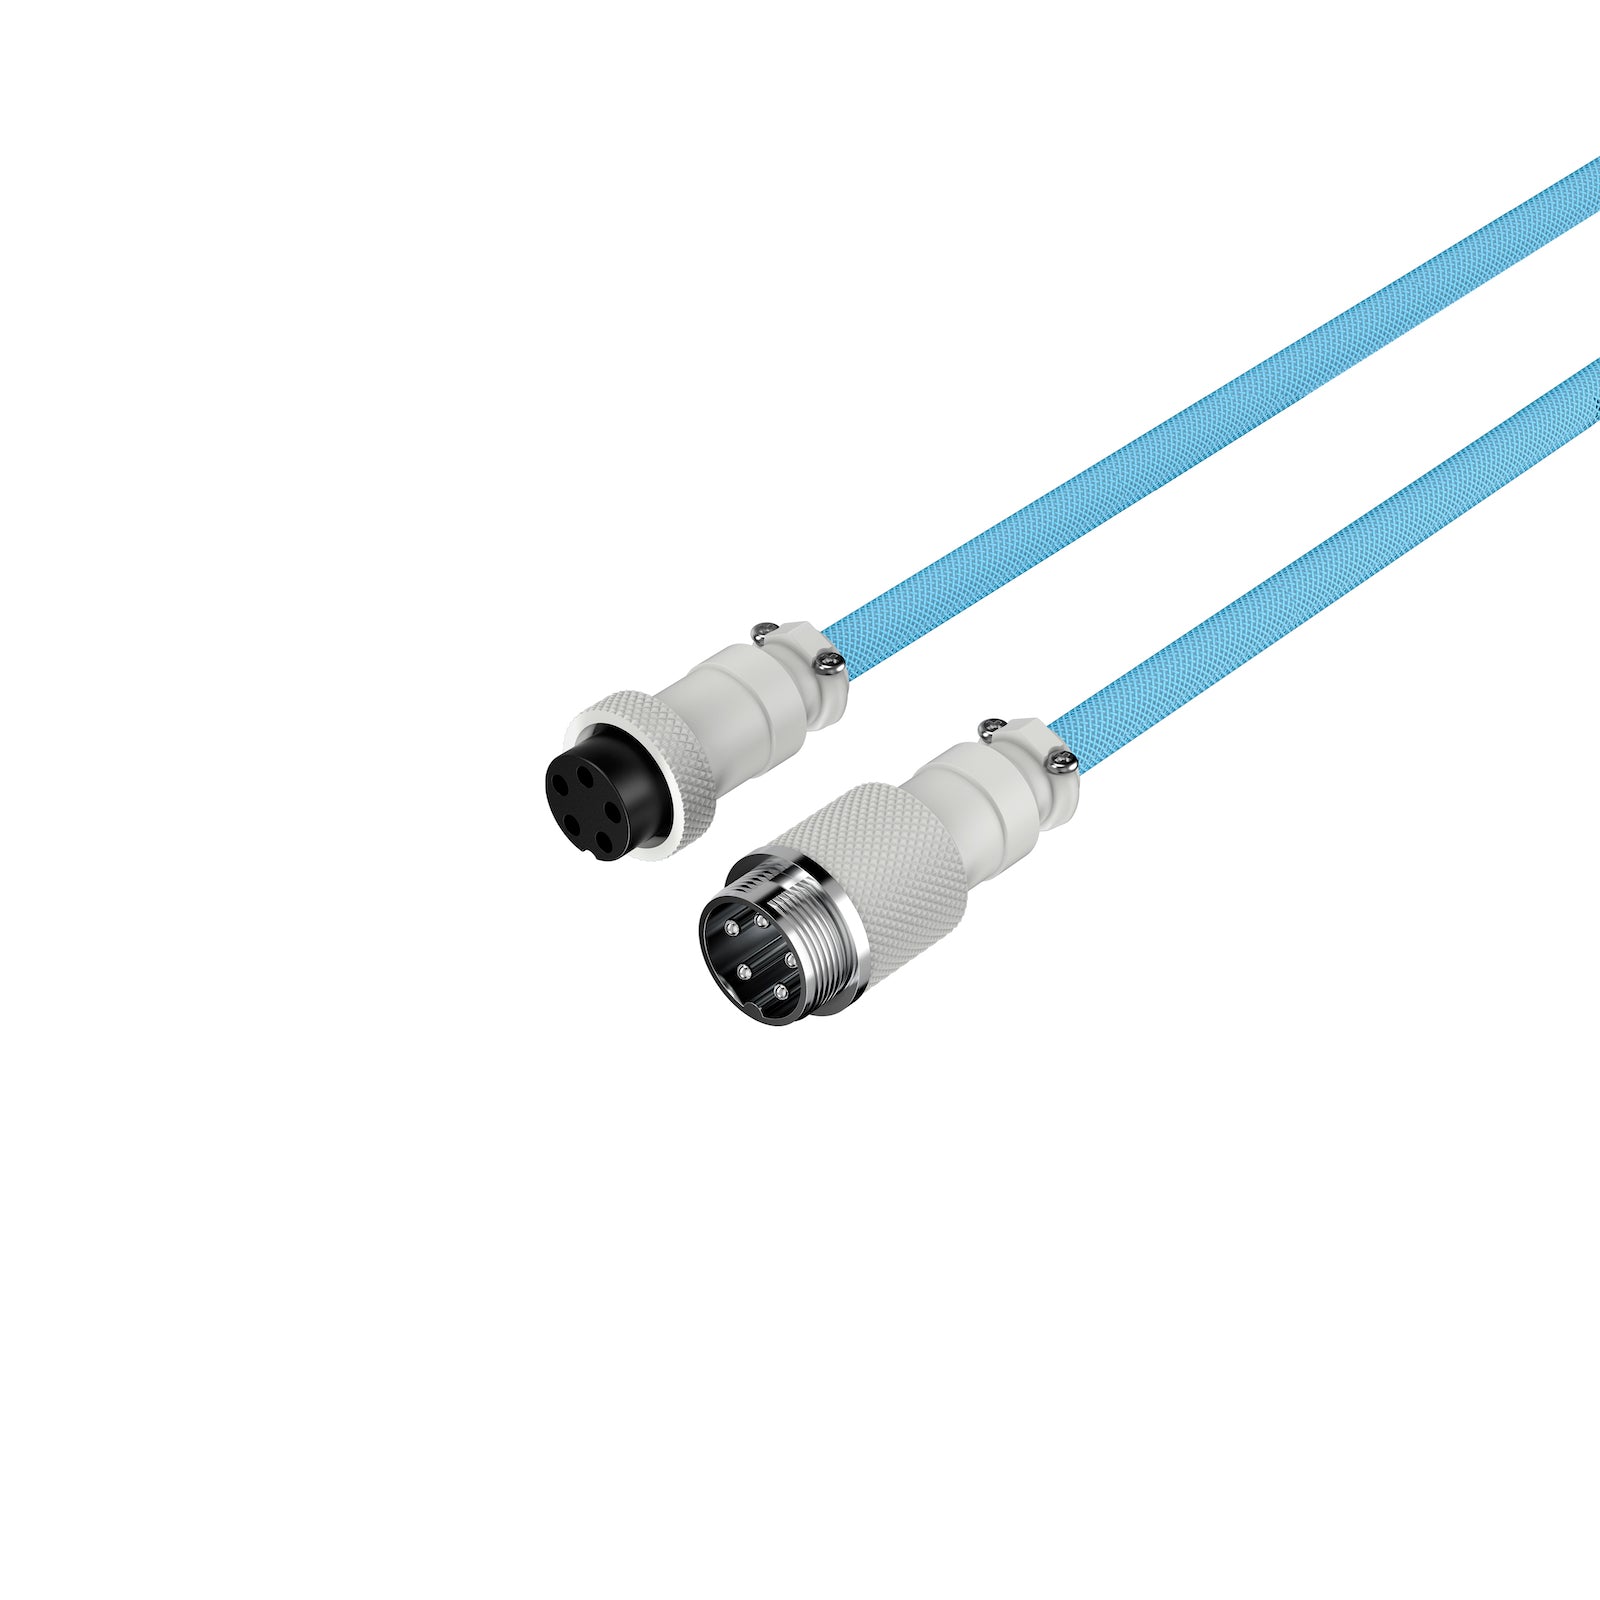 Angled side view of HyperX Coiled Cable in light blue